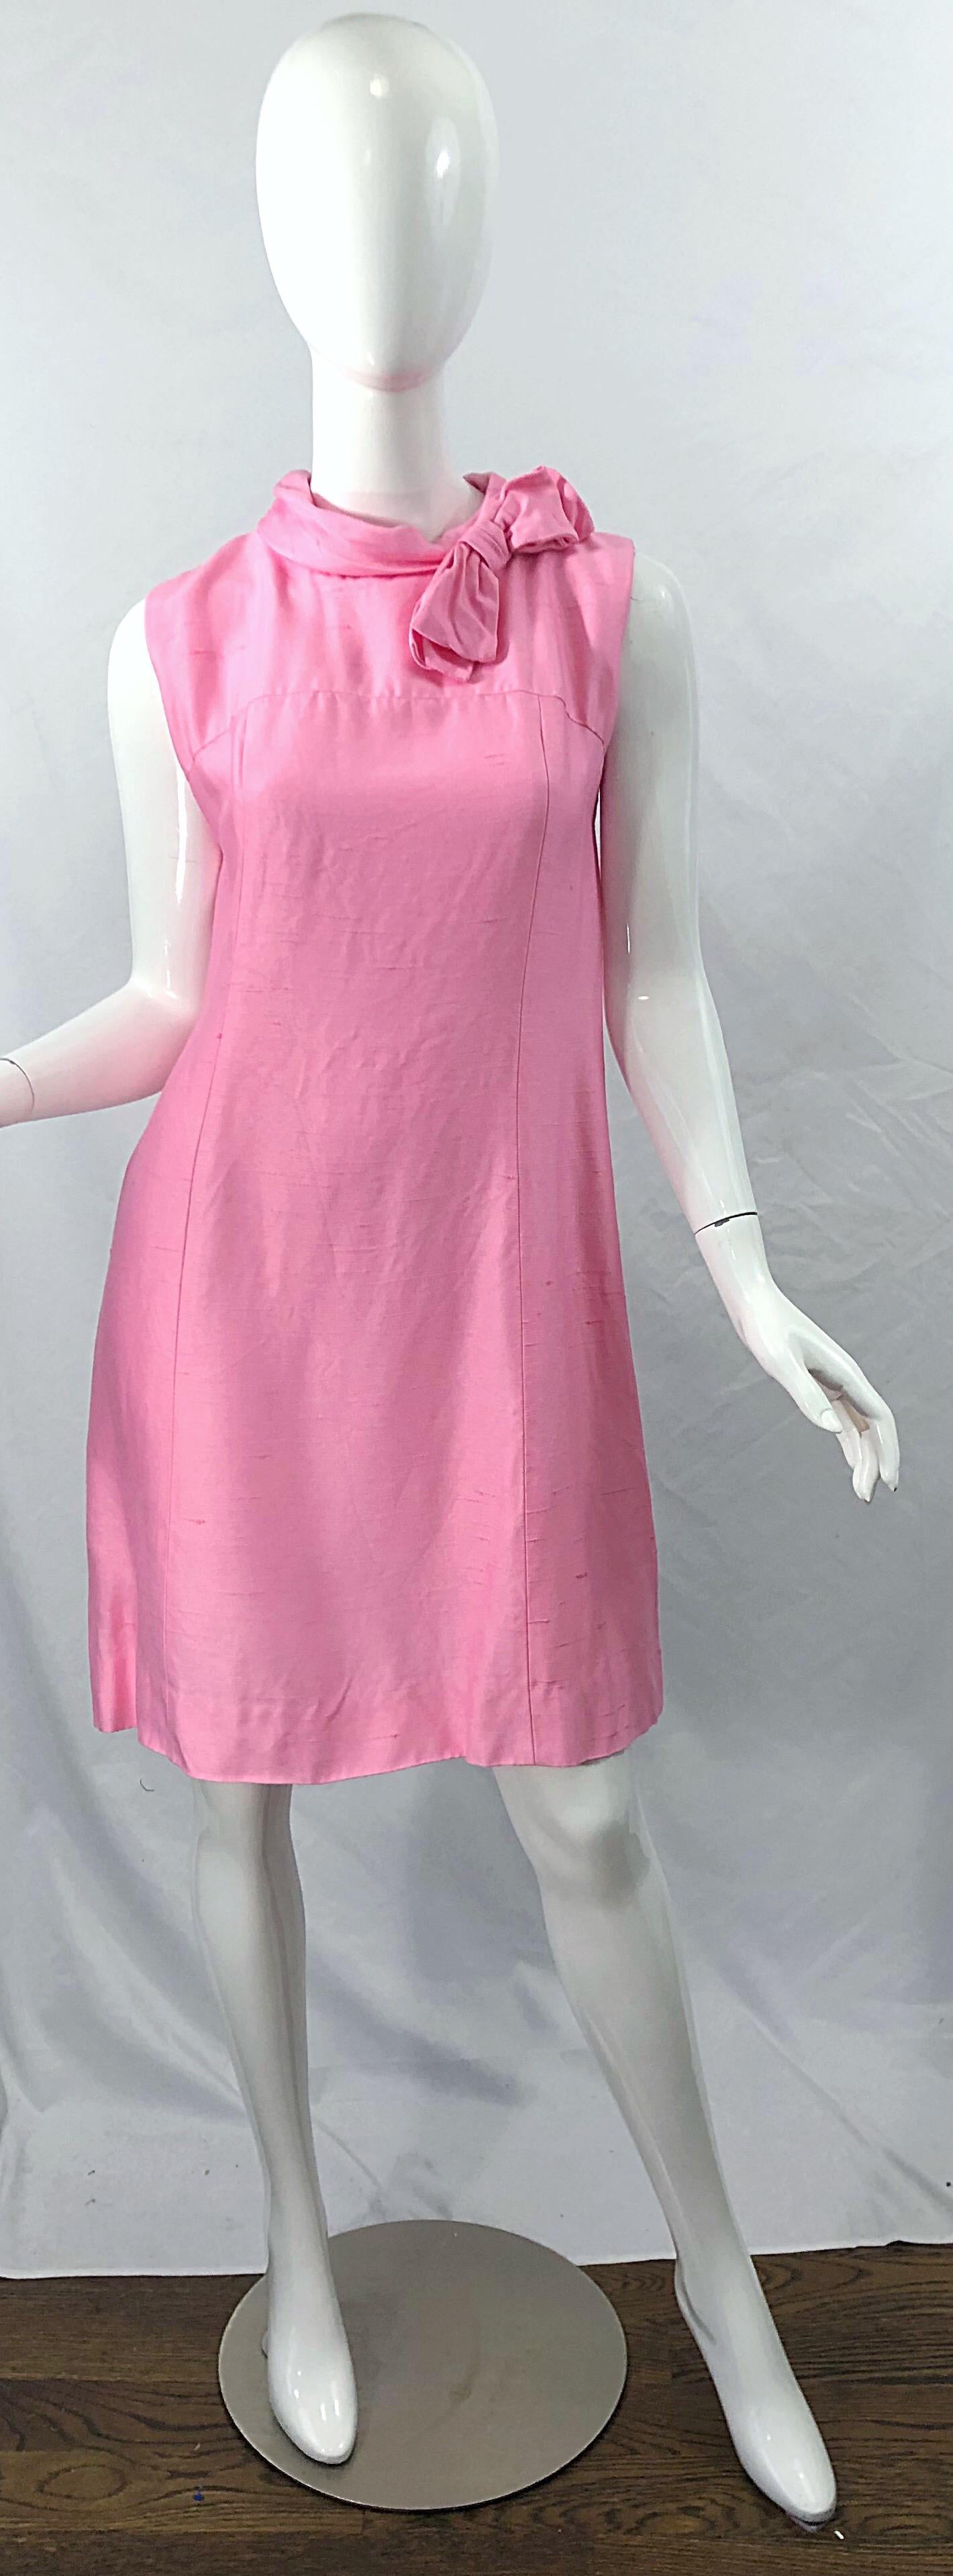 Chic 1960s bubblegum pink Jackie O style silk dress! Flattering sheath shape with a bow at top left center neck. Full metal zipper up the back with hook-and-eye closure. Perfect for any day or evening event. Pair with flats, sandals or wedges for